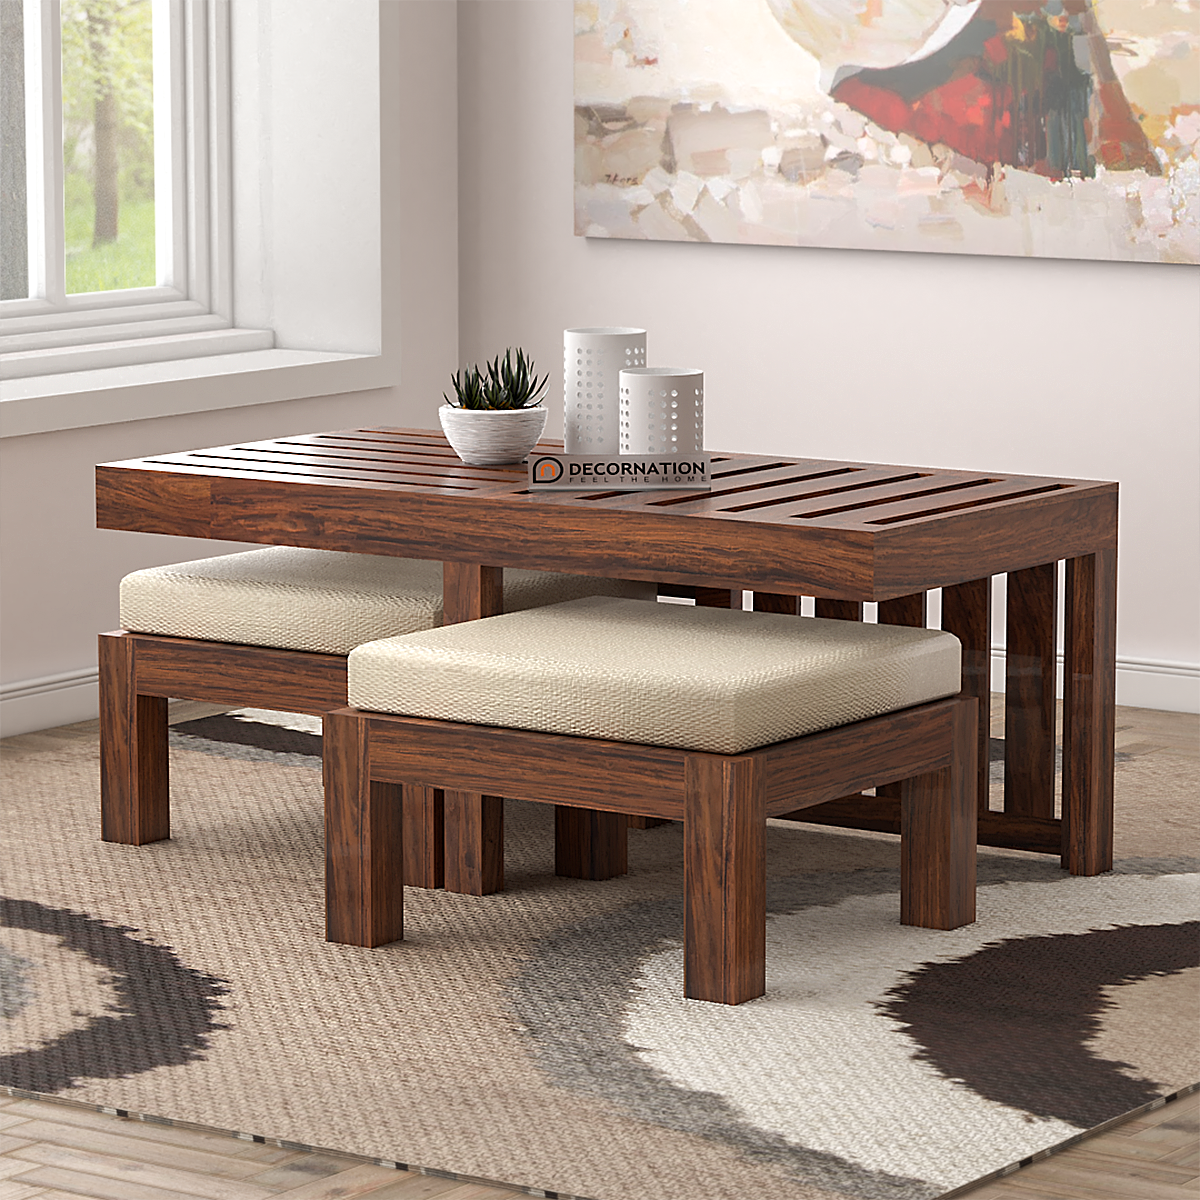 Myron Wooden Coffee Table 2 Stools – Natural Finish